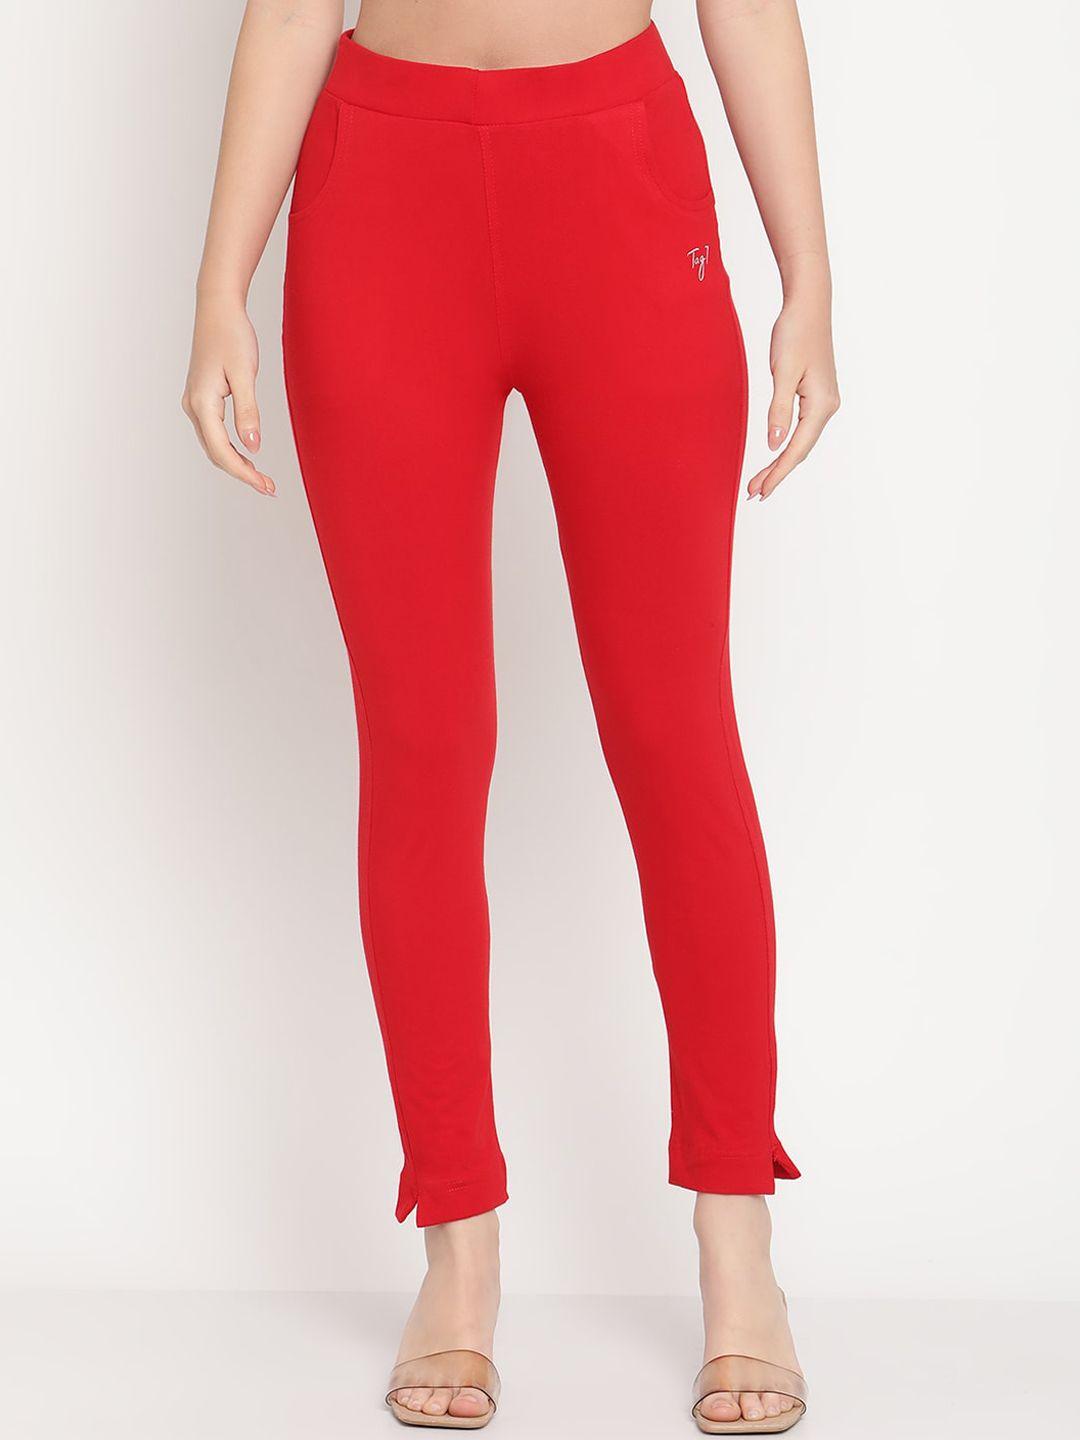 tag-7-women-red-solid-ankle-length-leggings